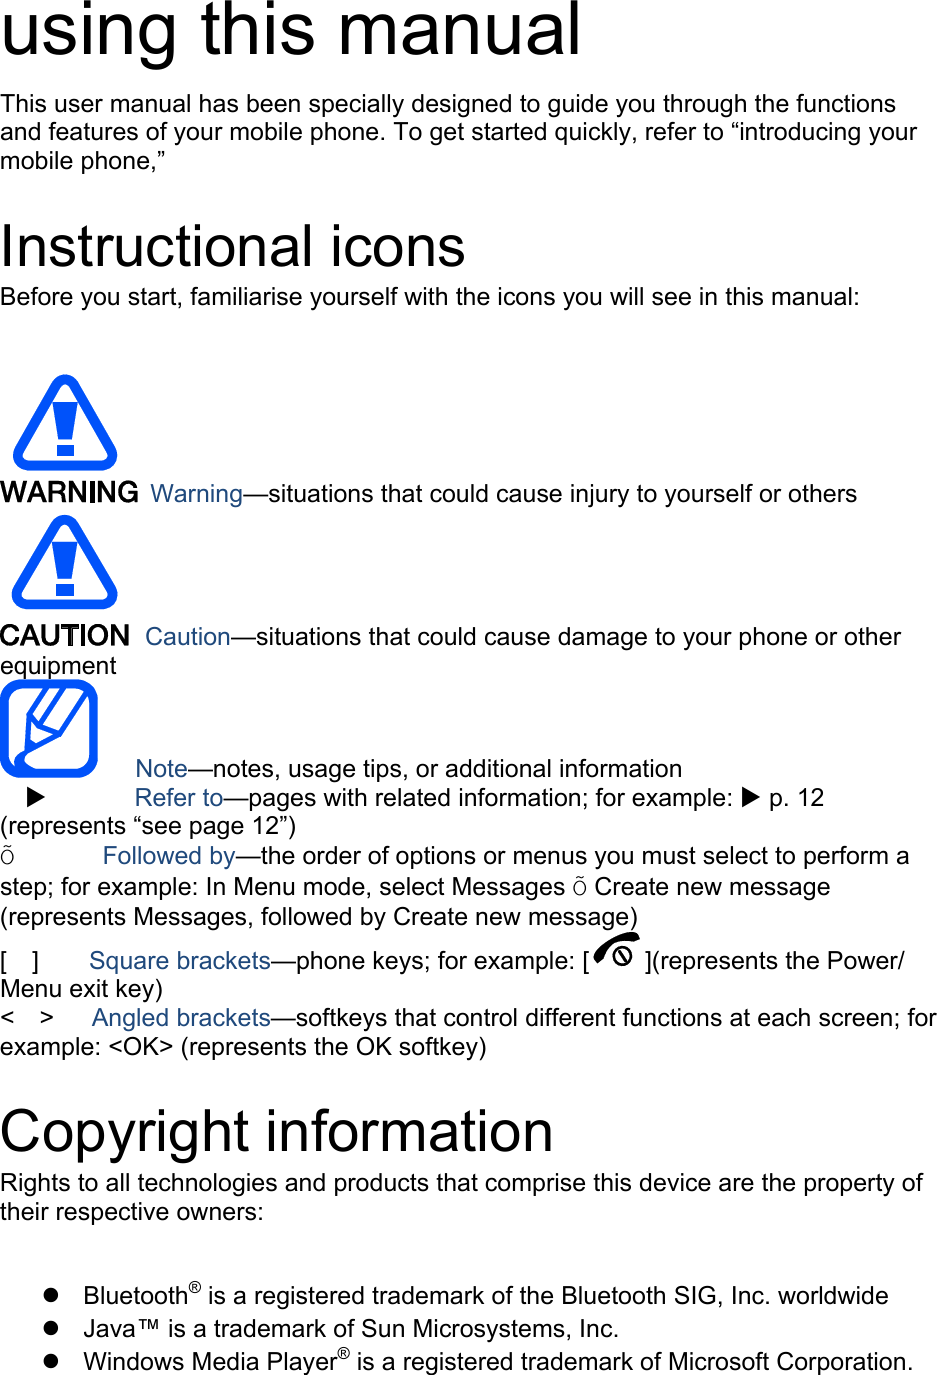 using this manual This user manual has been specially designed to guide you through the functions and features of your mobile phone. To get started quickly, refer to “introducing your mobile phone,”  Instructional icons Before you start, familiarise yourself with the icons you will see in this manual:     Warning—situations that could cause injury to yourself or others  Caution—situations that could cause damage to your phone or other equipment    Note—notes, usage tips, or additional information          Refer to—pages with related information; for example:  p. 12 (represents “see page 12”) Õ       Followed by—the order of options or menus you must select to perform a step; for example: In Menu mode, select Messages Õ Create new message (represents Messages, followed by Create new message) [  ]    Square brackets—phone keys; for example: [ ](represents the Power/ Menu exit key) &lt;  &gt;   Angled brackets—softkeys that control different functions at each screen; for example: &lt;OK&gt; (represents the OK softkey)  Copyright information Rights to all technologies and products that comprise this device are the property of their respective owners:   Bluetooth® is a registered trademark of the Bluetooth SIG, Inc. worldwide   Java™ is a trademark of Sun Microsystems, Inc.  Windows Media Player® is a registered trademark of Microsoft Corporation. 